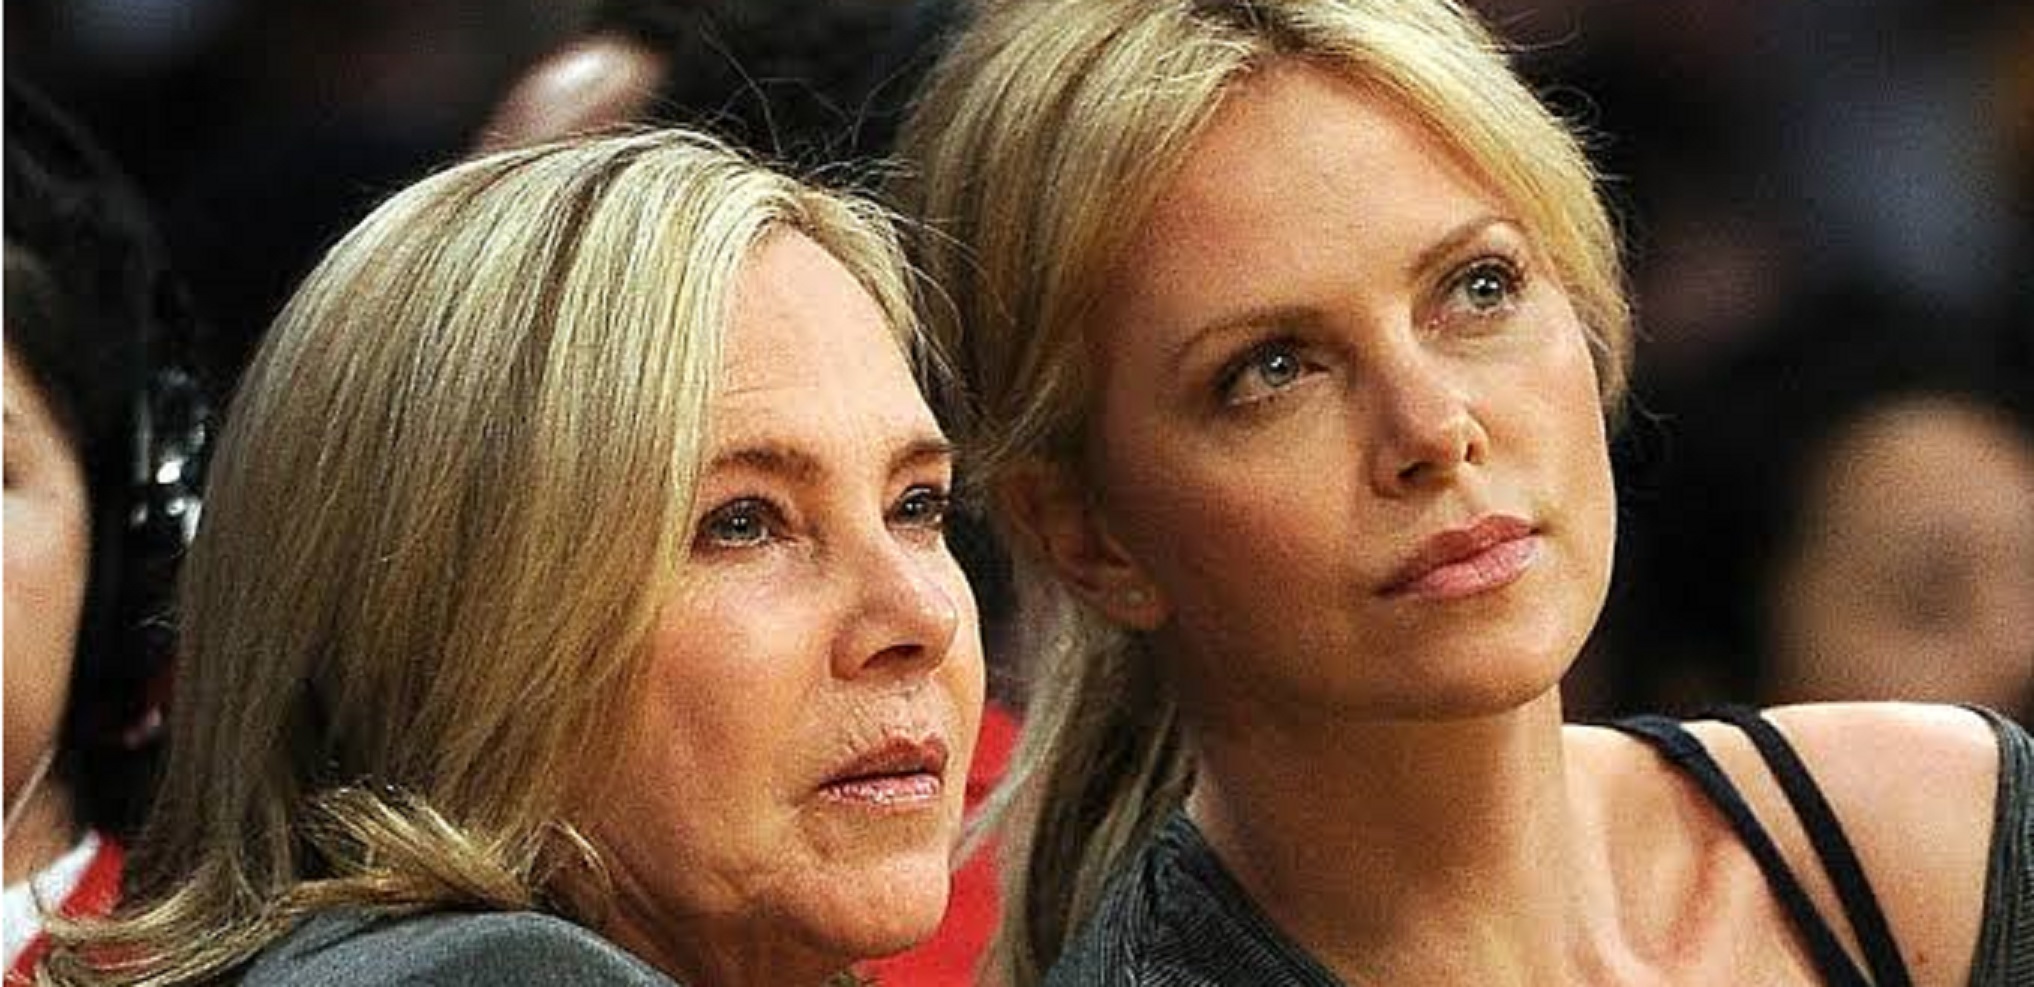 Charlize Theron Talks About The Night Her Mother Killed Her Father In Self-Defense